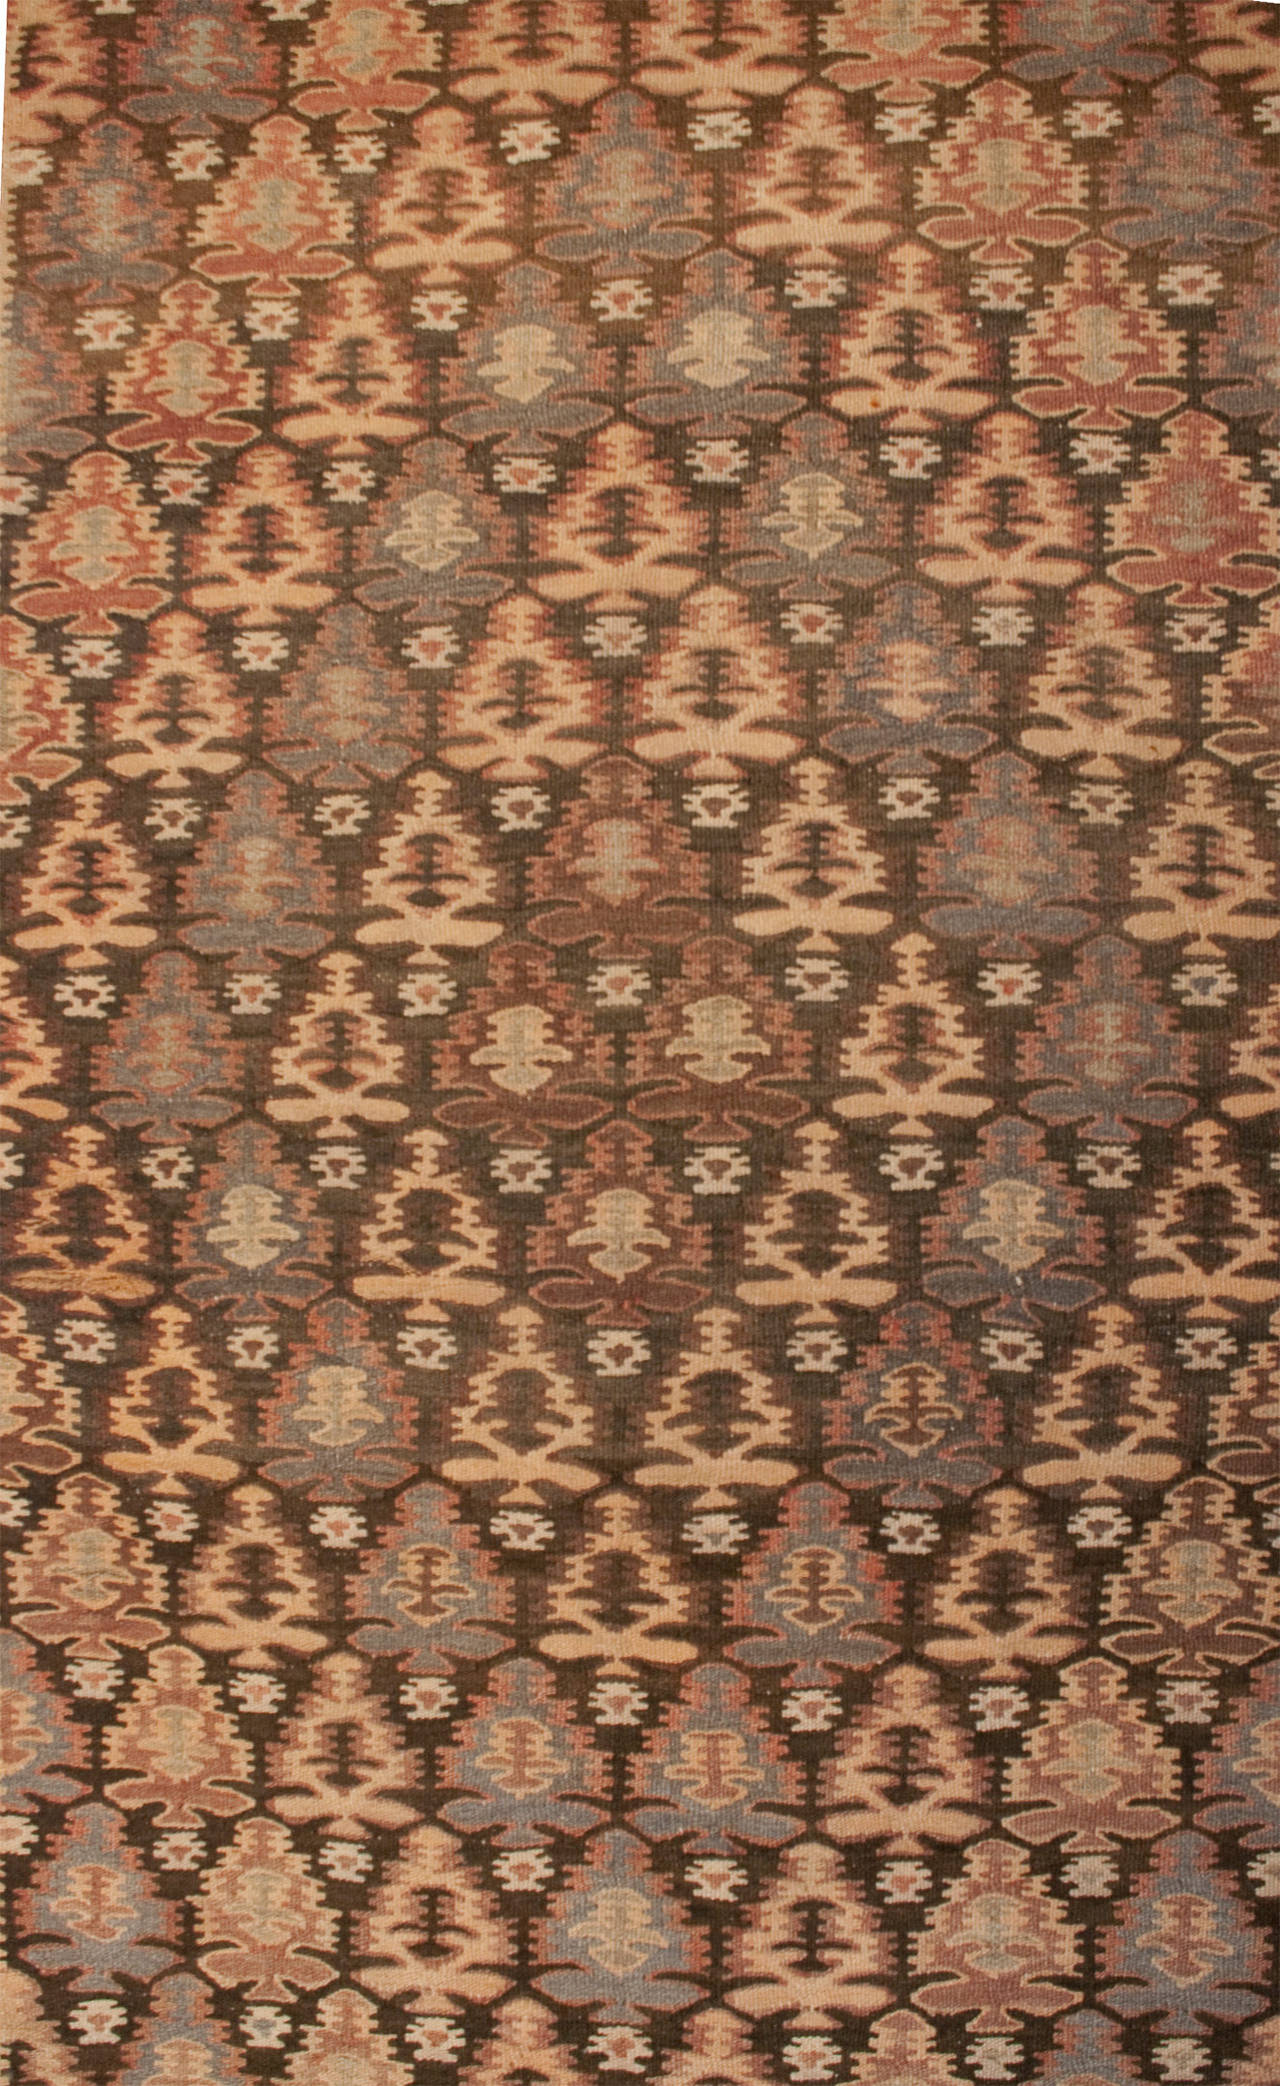 An early 20th century Persian Qazvin Kilim runner with a wonderful all-over multicolored floral pattern surrounded by a complementary geometric border.